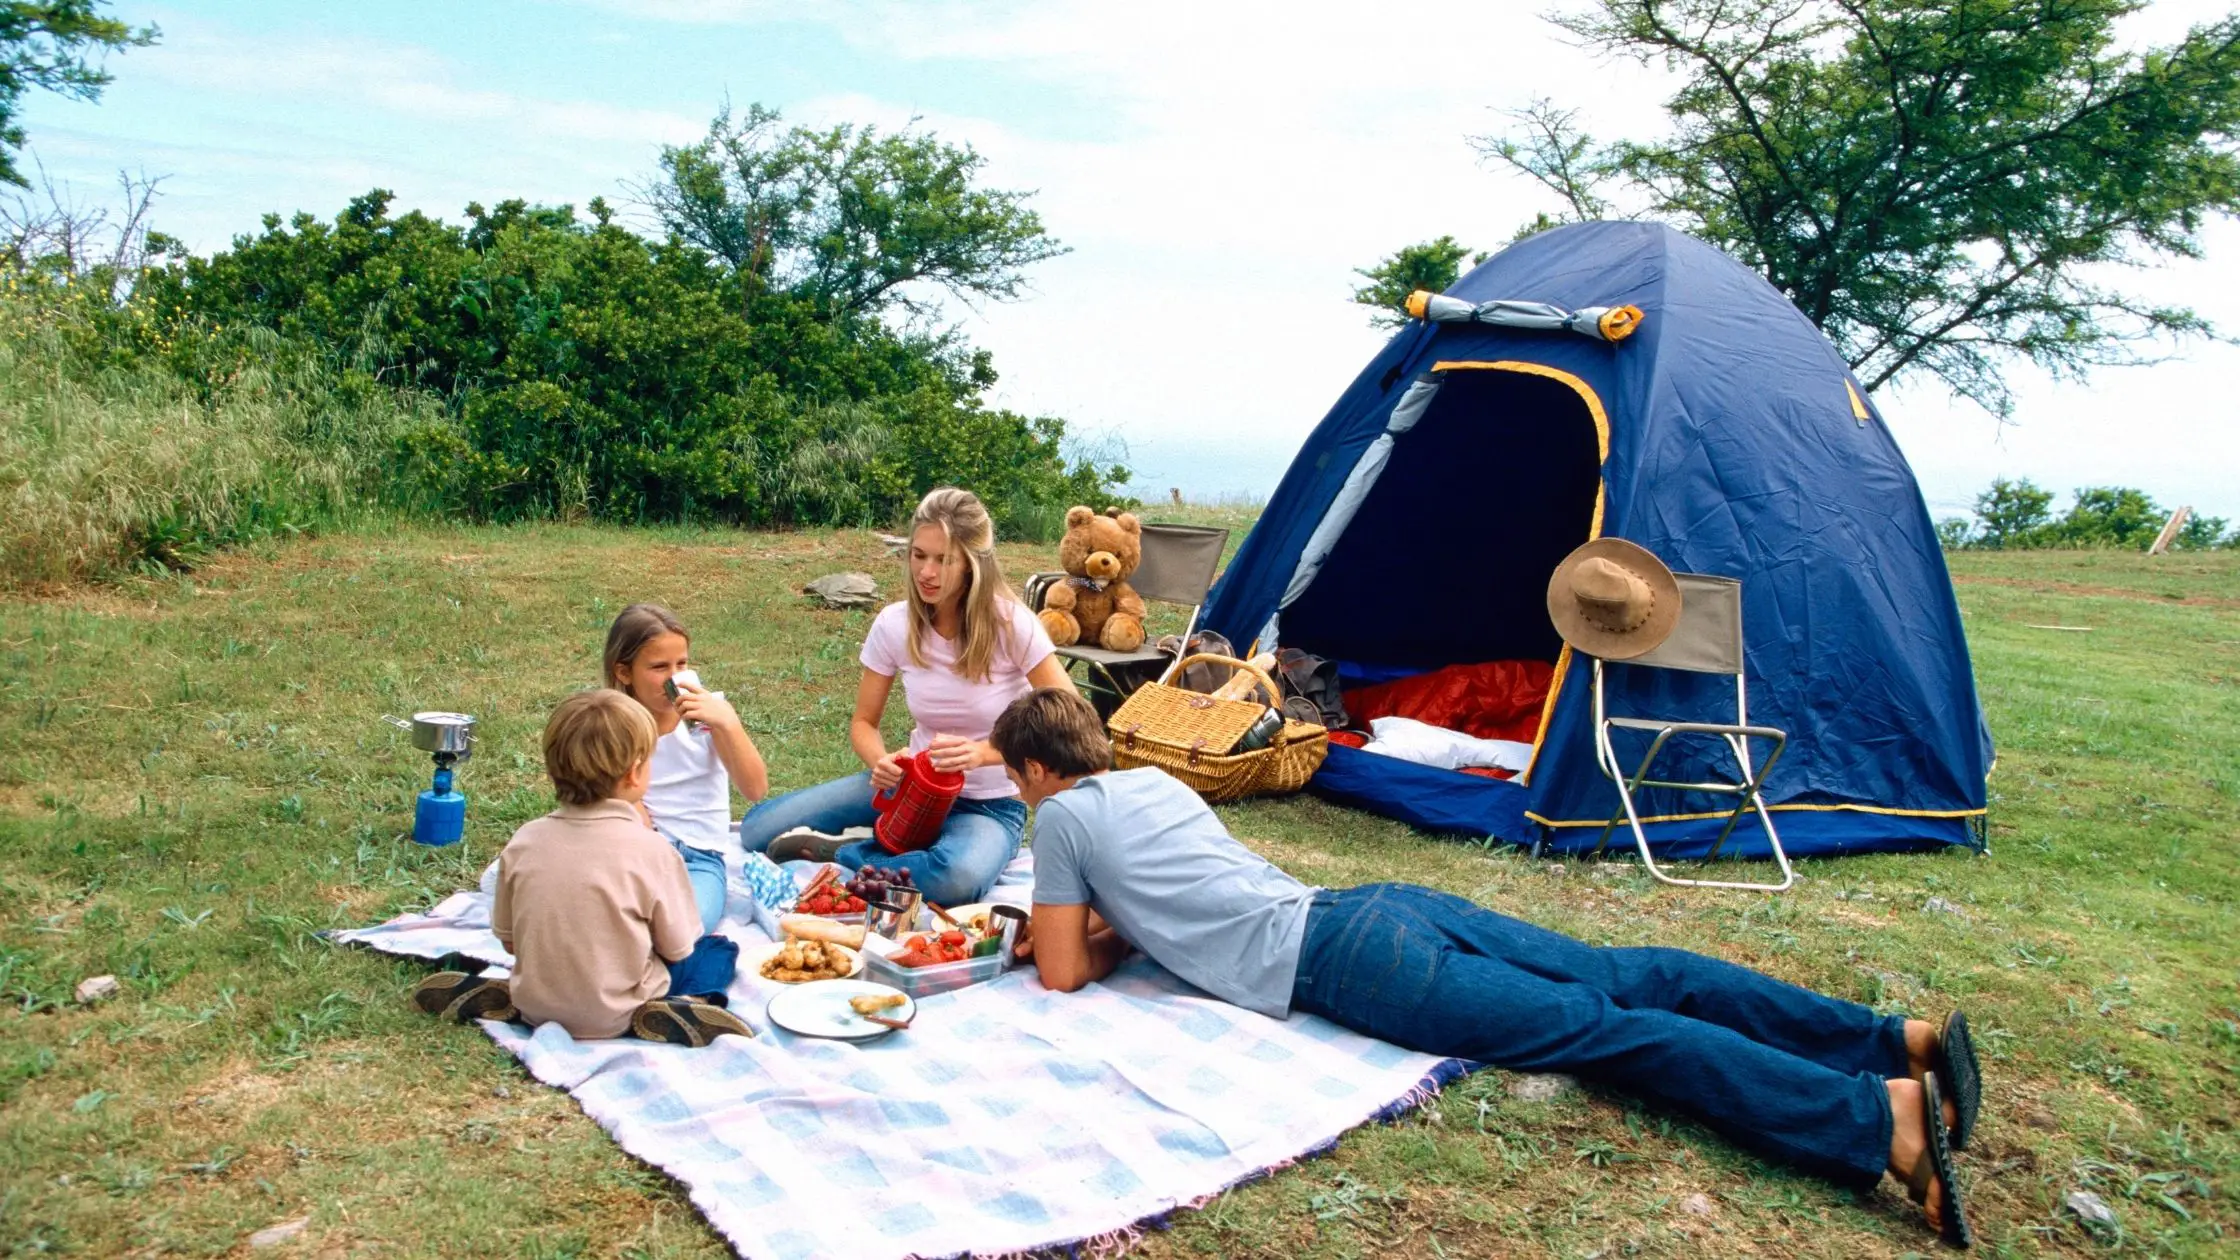 Why Is Camping So Expensive?